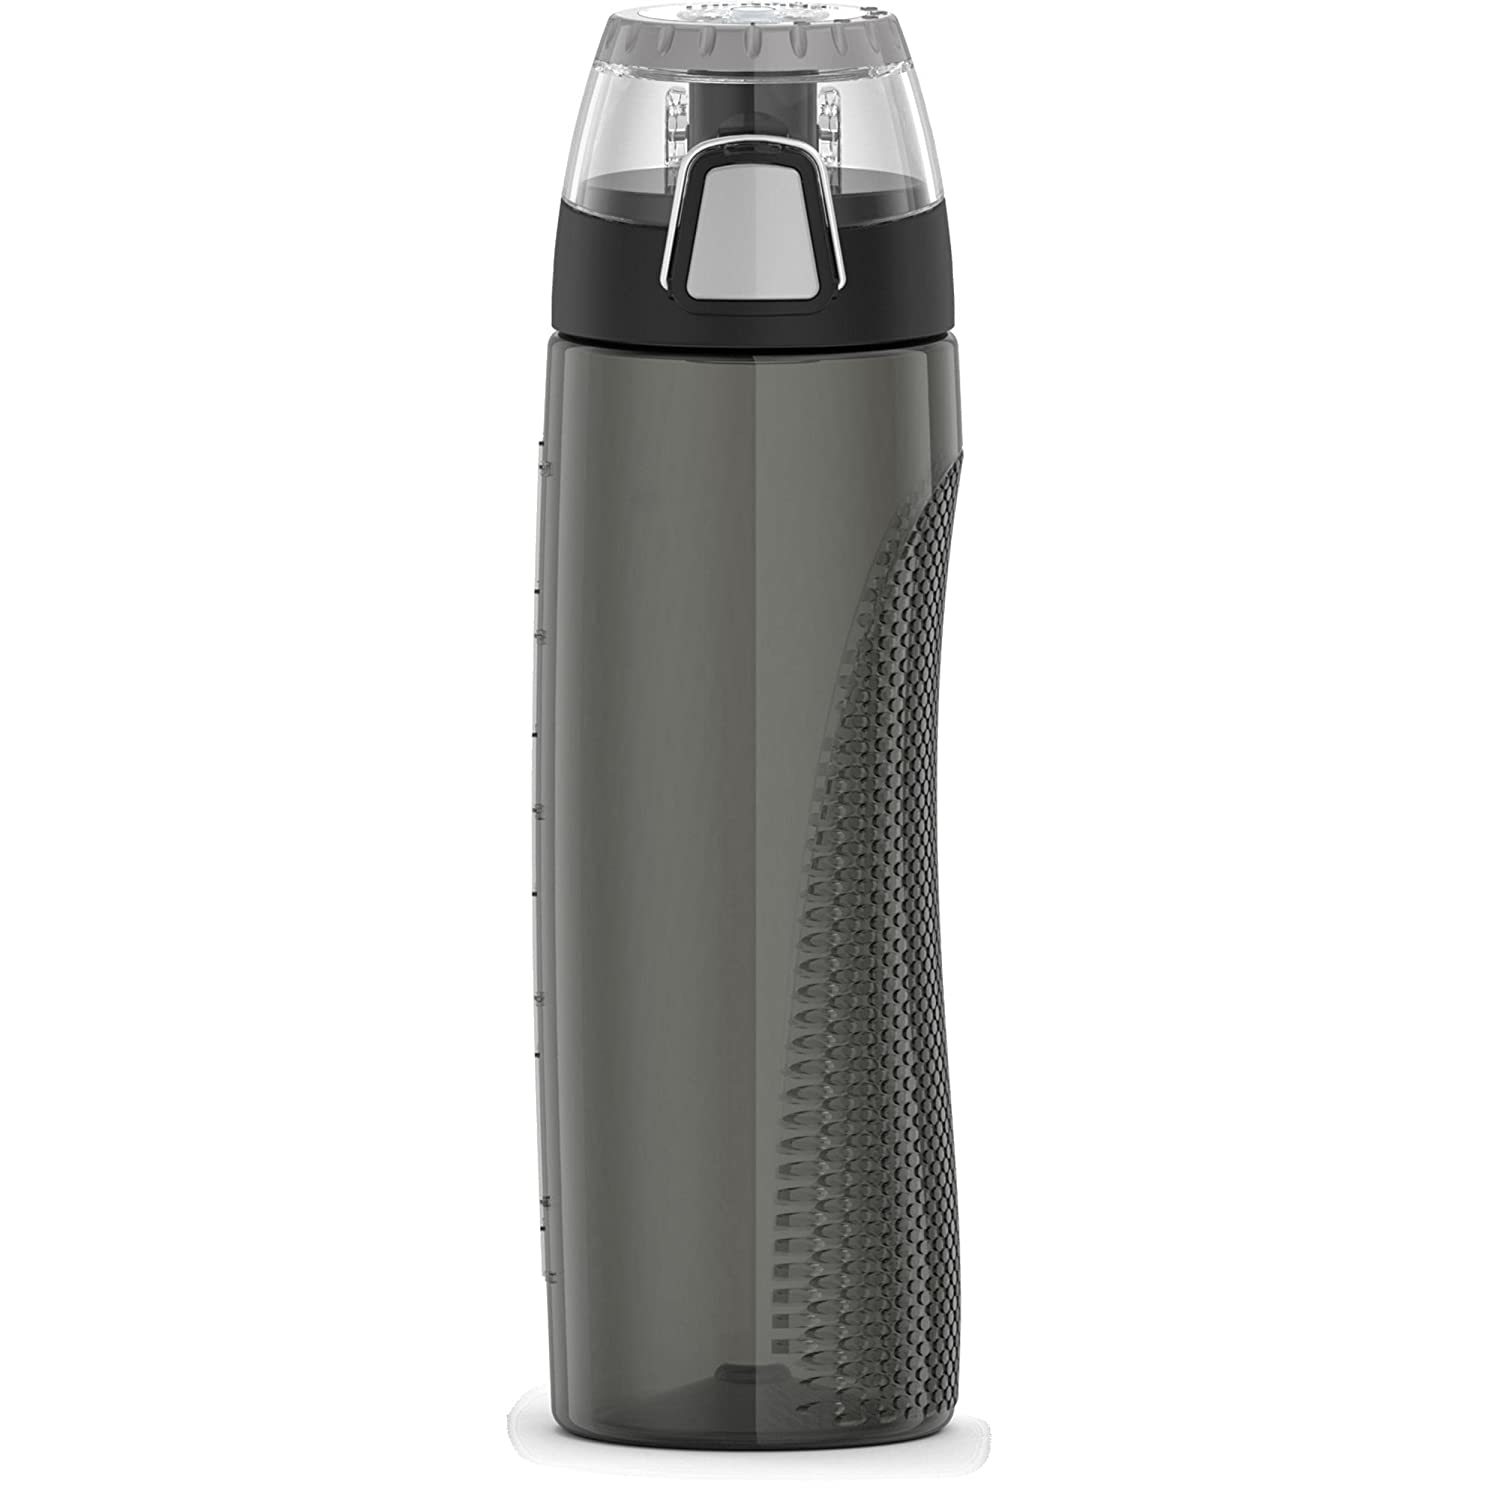 THERMOS Intak 24 Ounce Hydration Bottle with Meter, Smoke - $36.09